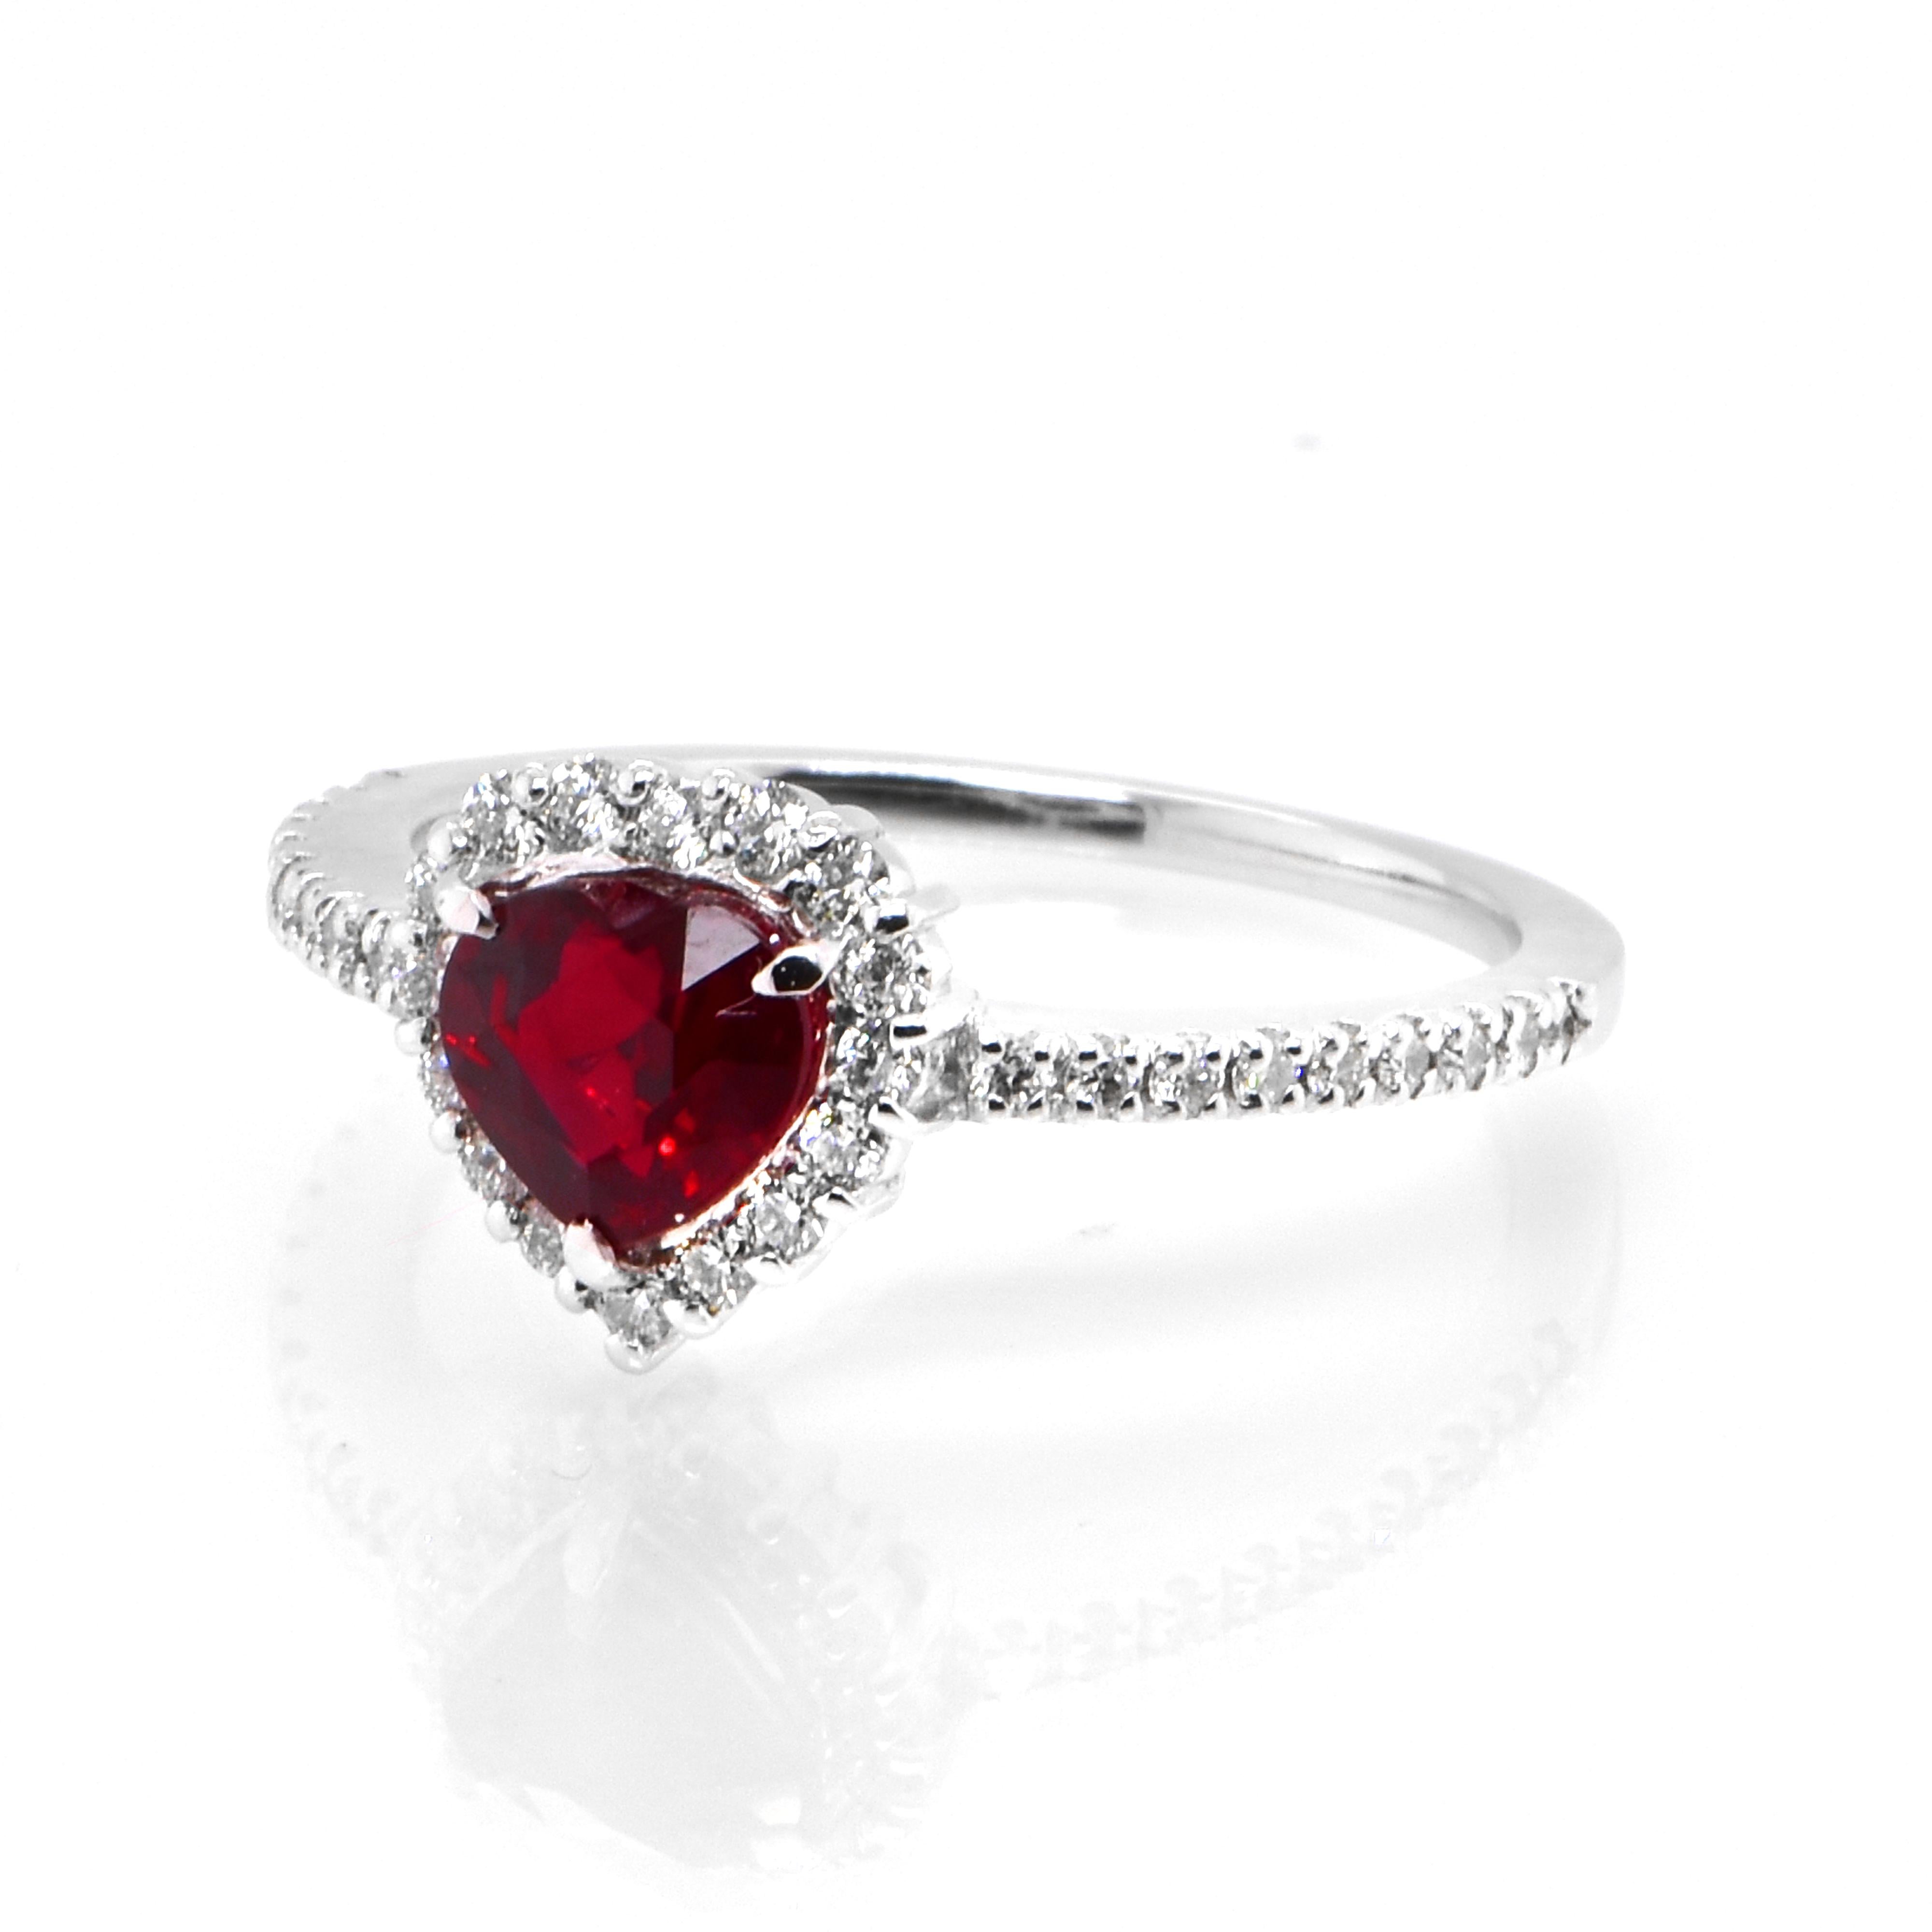 A beautiful Ring set in Platinum featuring a GIA Certified 1.01 Carat Natural, Pigeons Blood Red, Burmese Ruby and 0.27 Carat Diamonds. Rubies are referred to as 